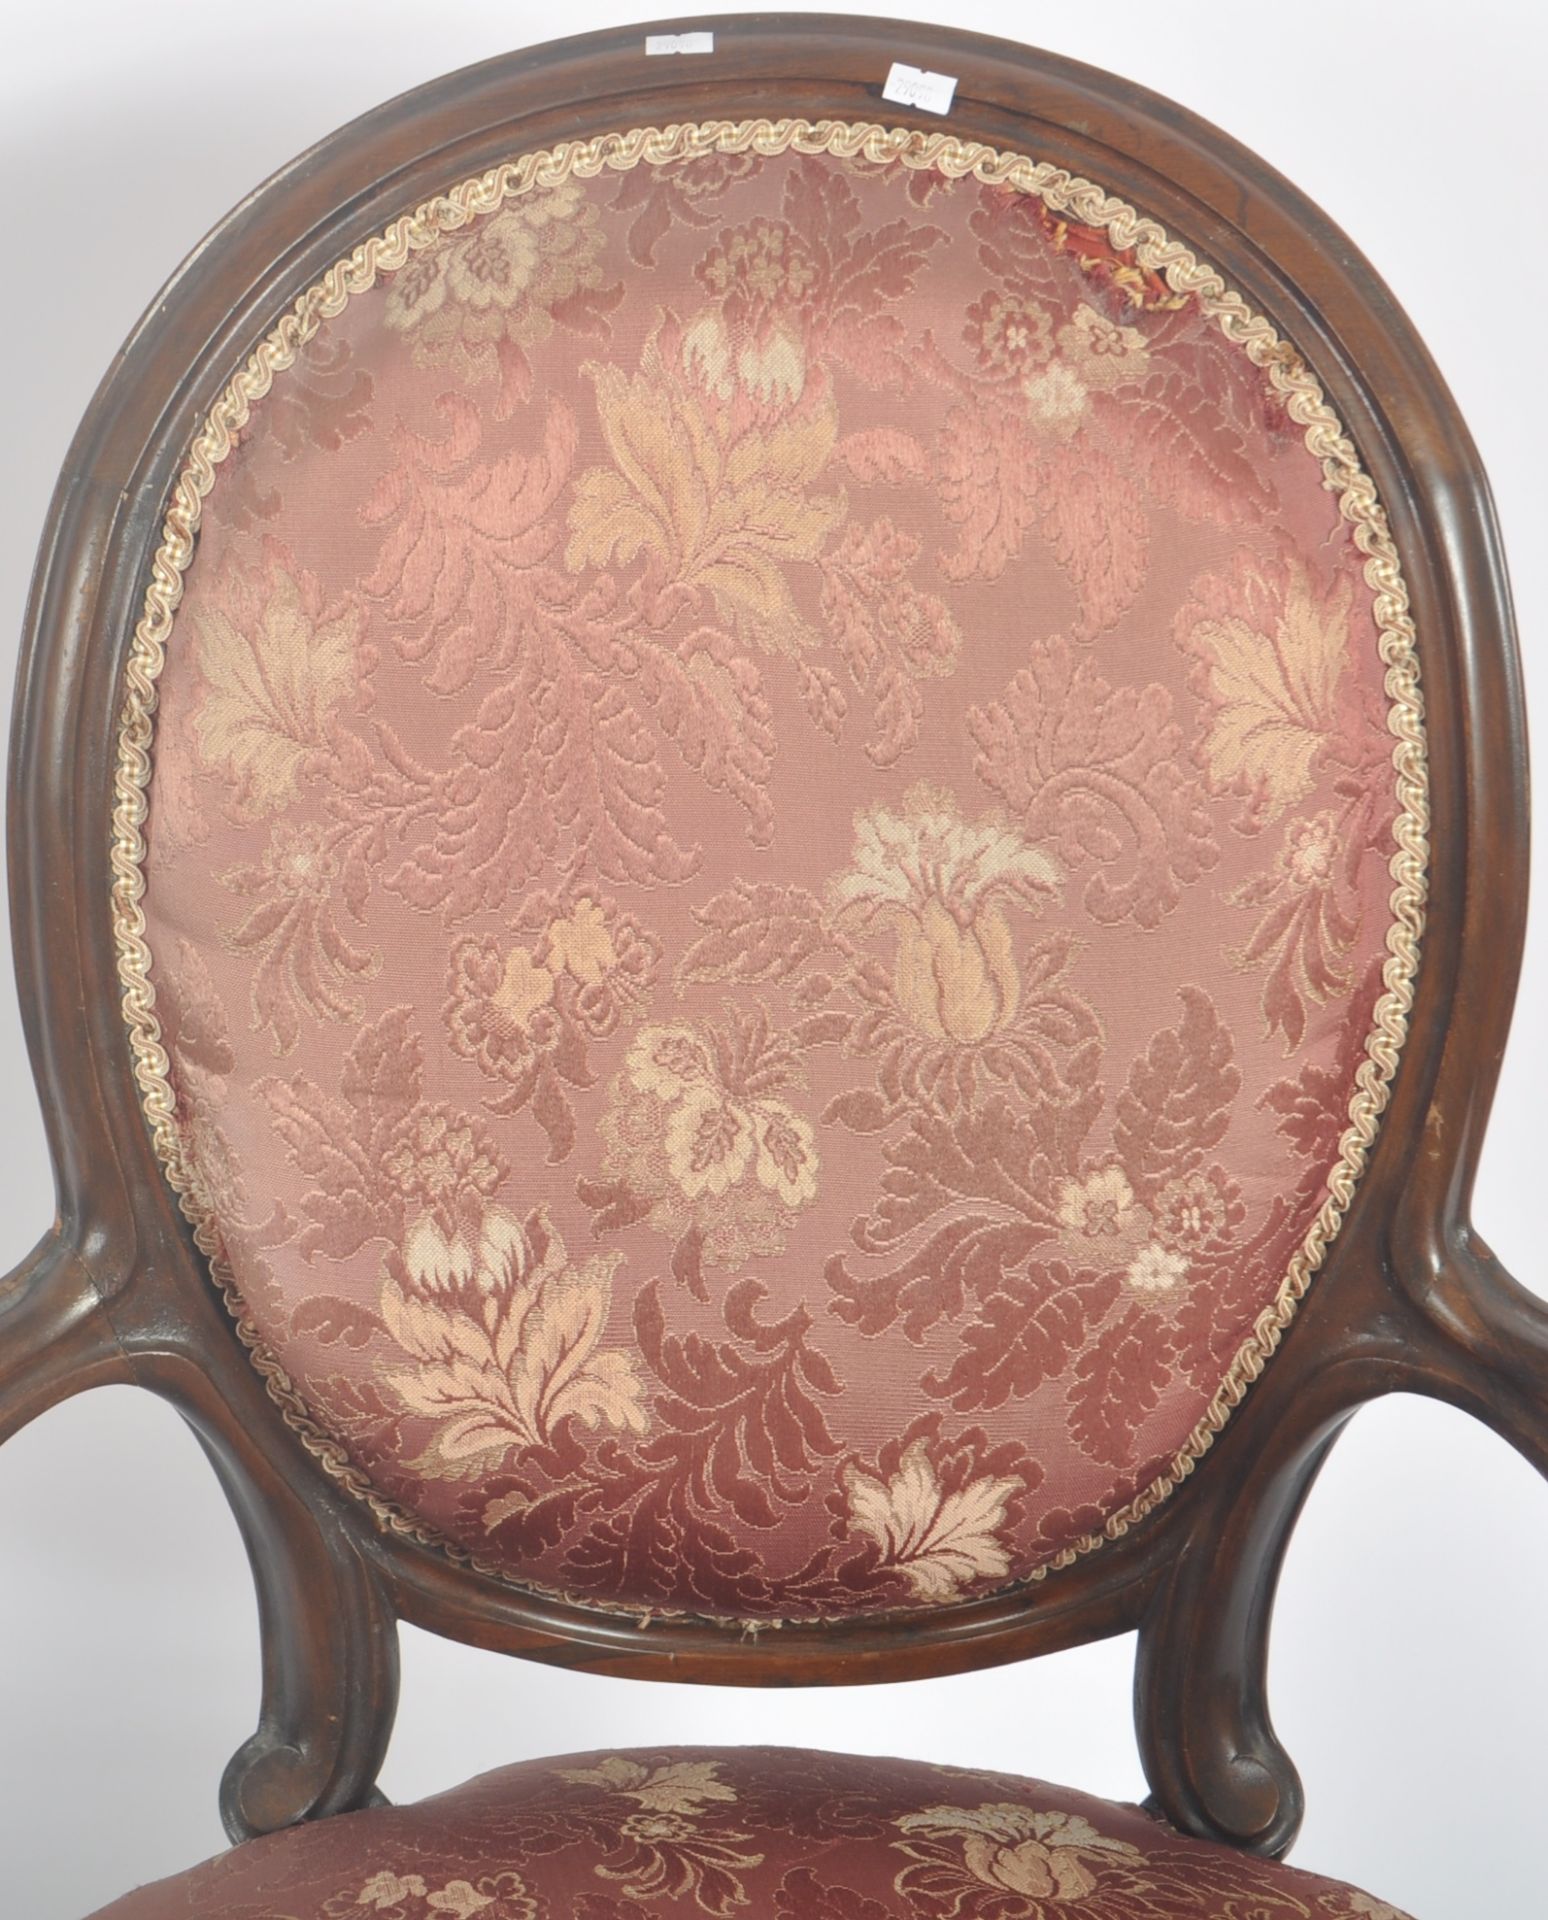 19TH CENTURY VICTORIAN ROSEWOOD SALON CHAIR - Image 4 of 6